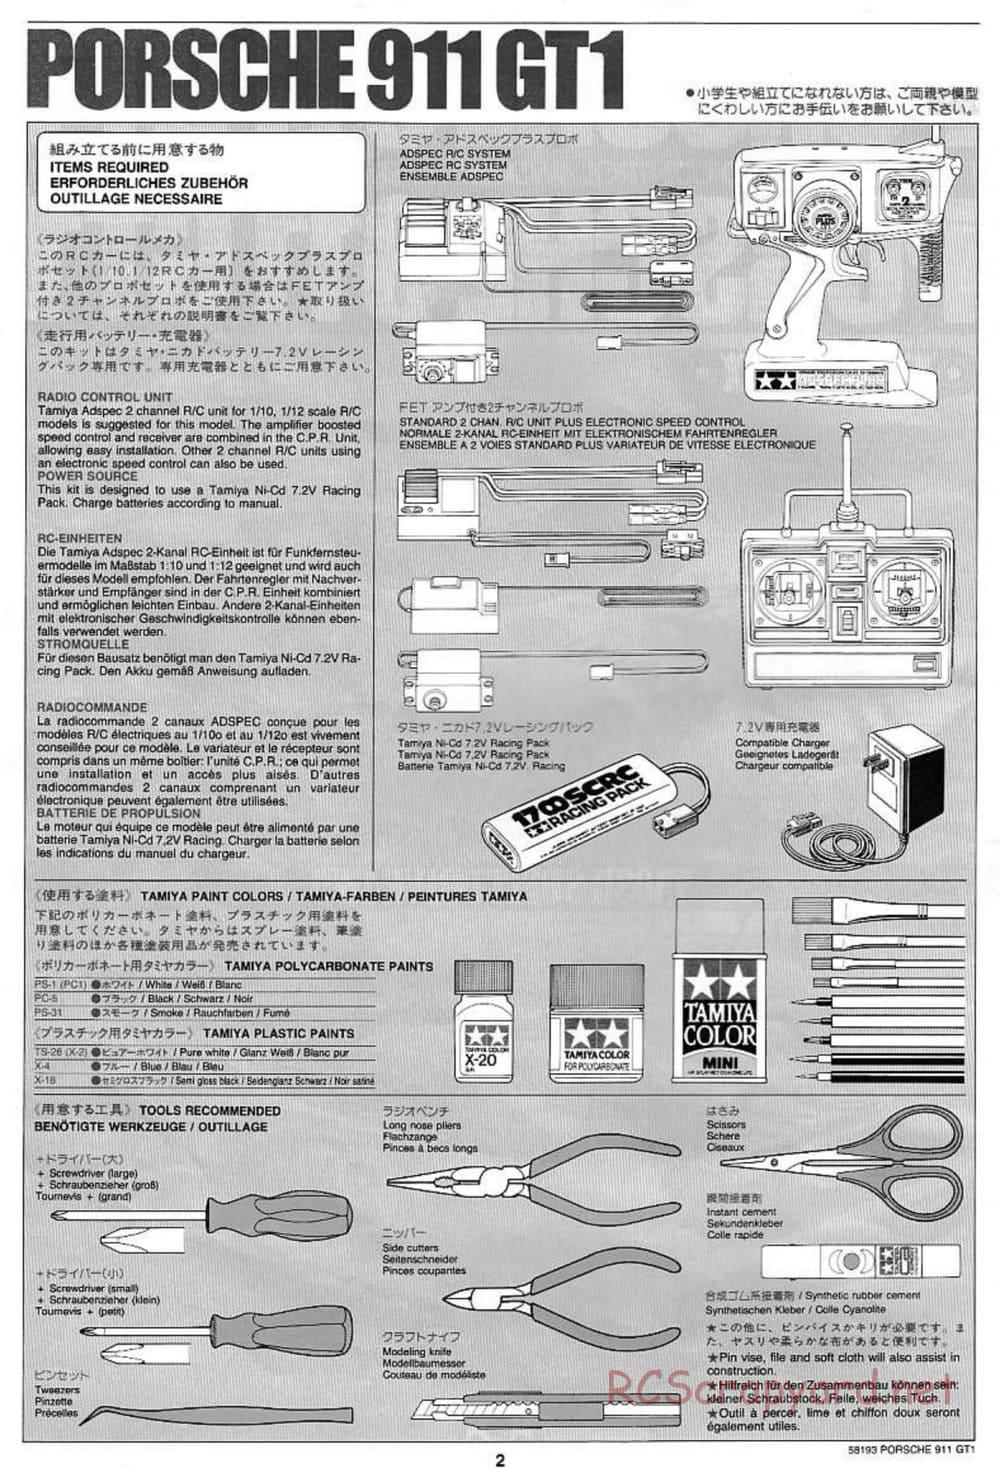 Tamiya - Porsche 911 GT1 - TA-03RS Chassis - Manual - Page 2